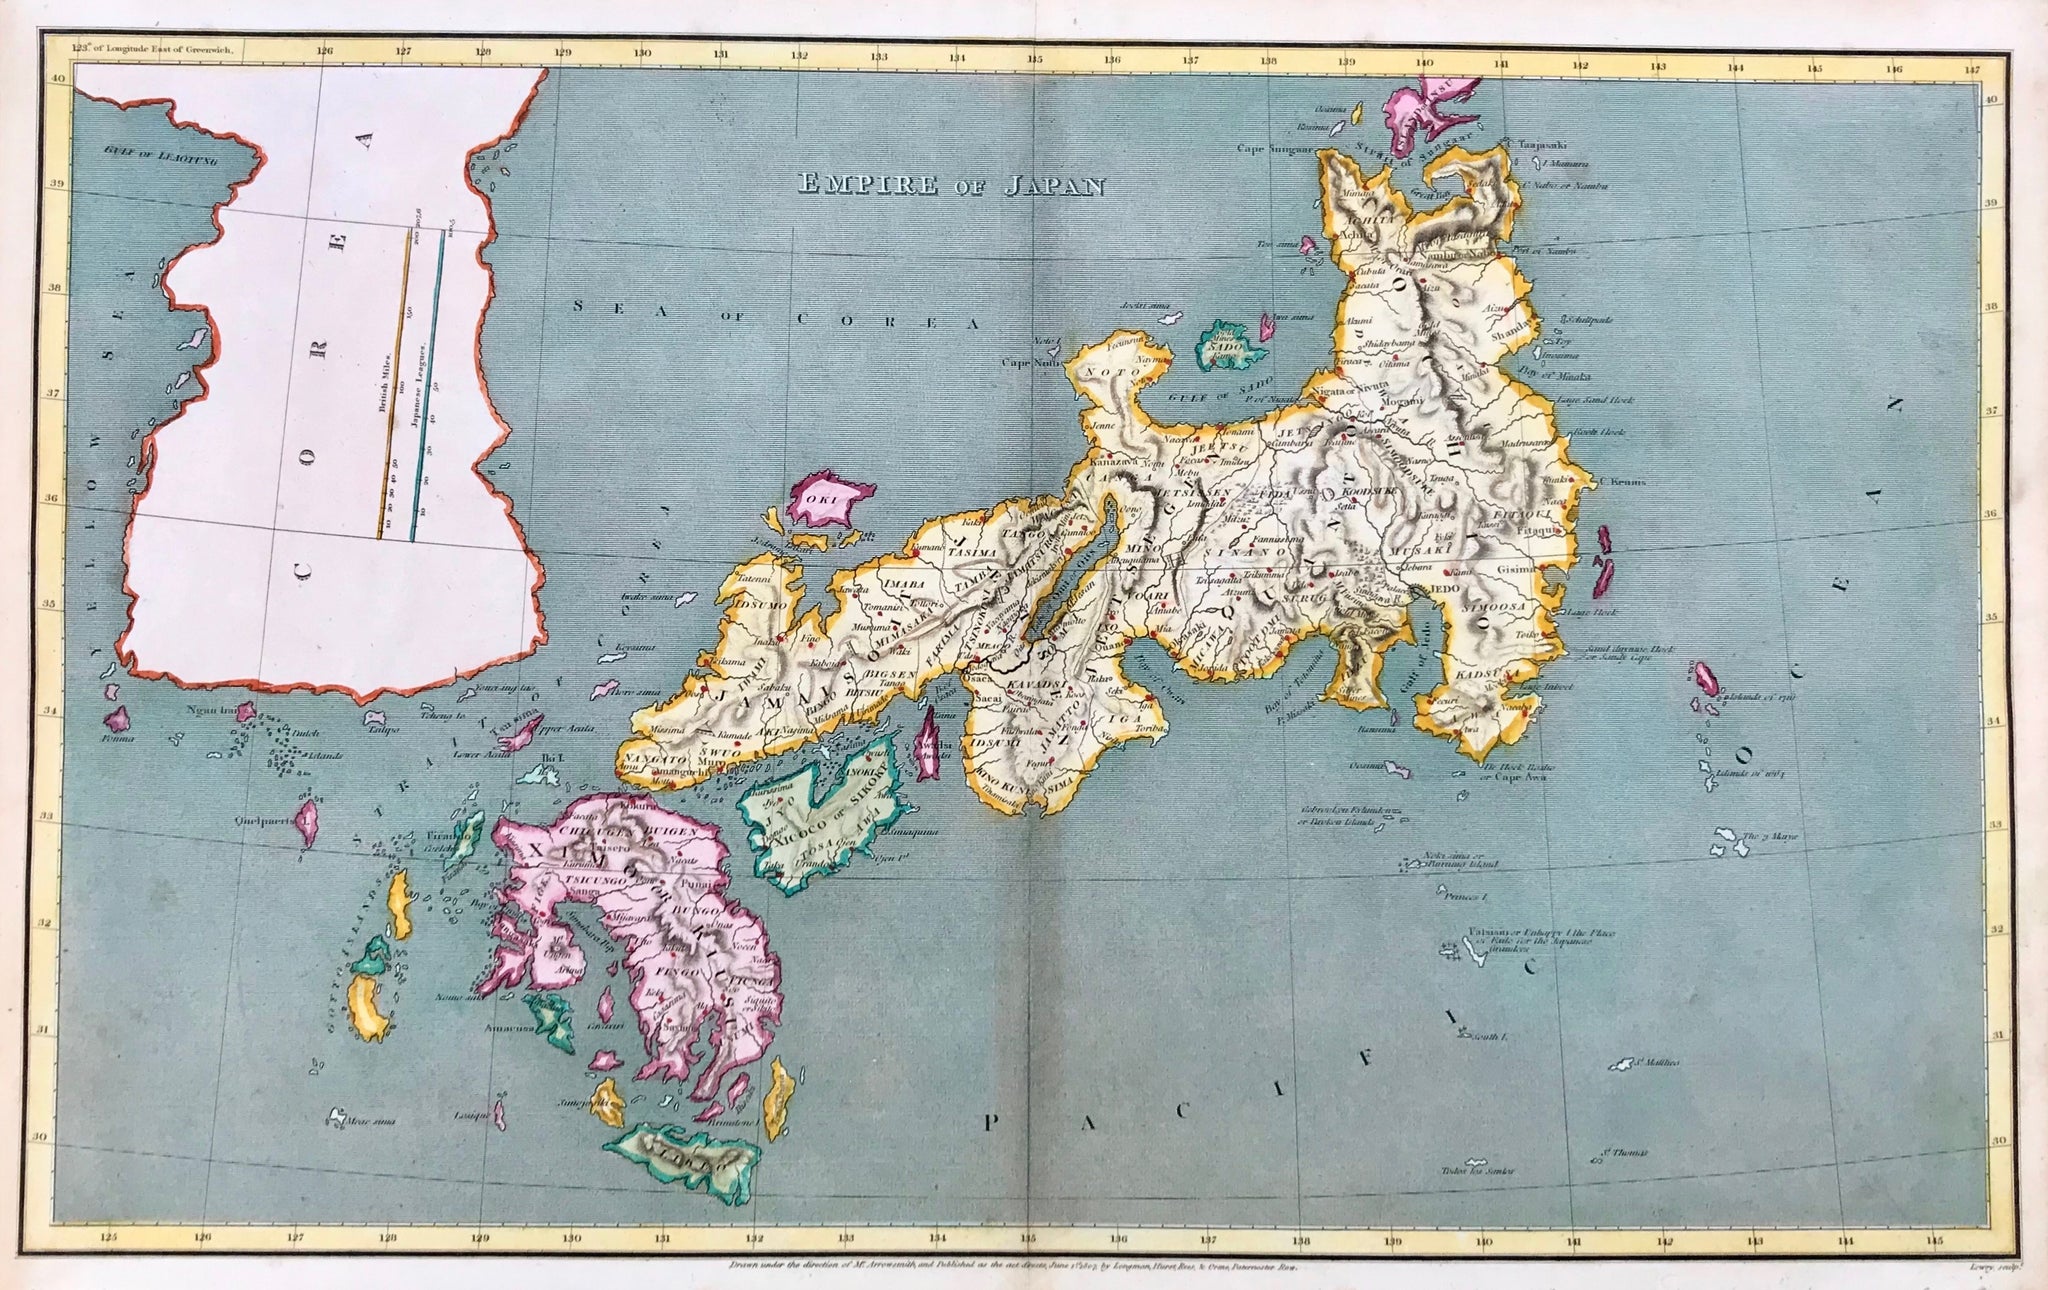 "Empire of Japan". Copper etching by Lowry drawn under the direction of M. Arrowsmith and published June 1, 1807 in London. Modern hand coloring.  Map shows Japan with its many islands and an outline of Korea. The vertical lines in Korea are scales for British miles and Japanese Leagues.